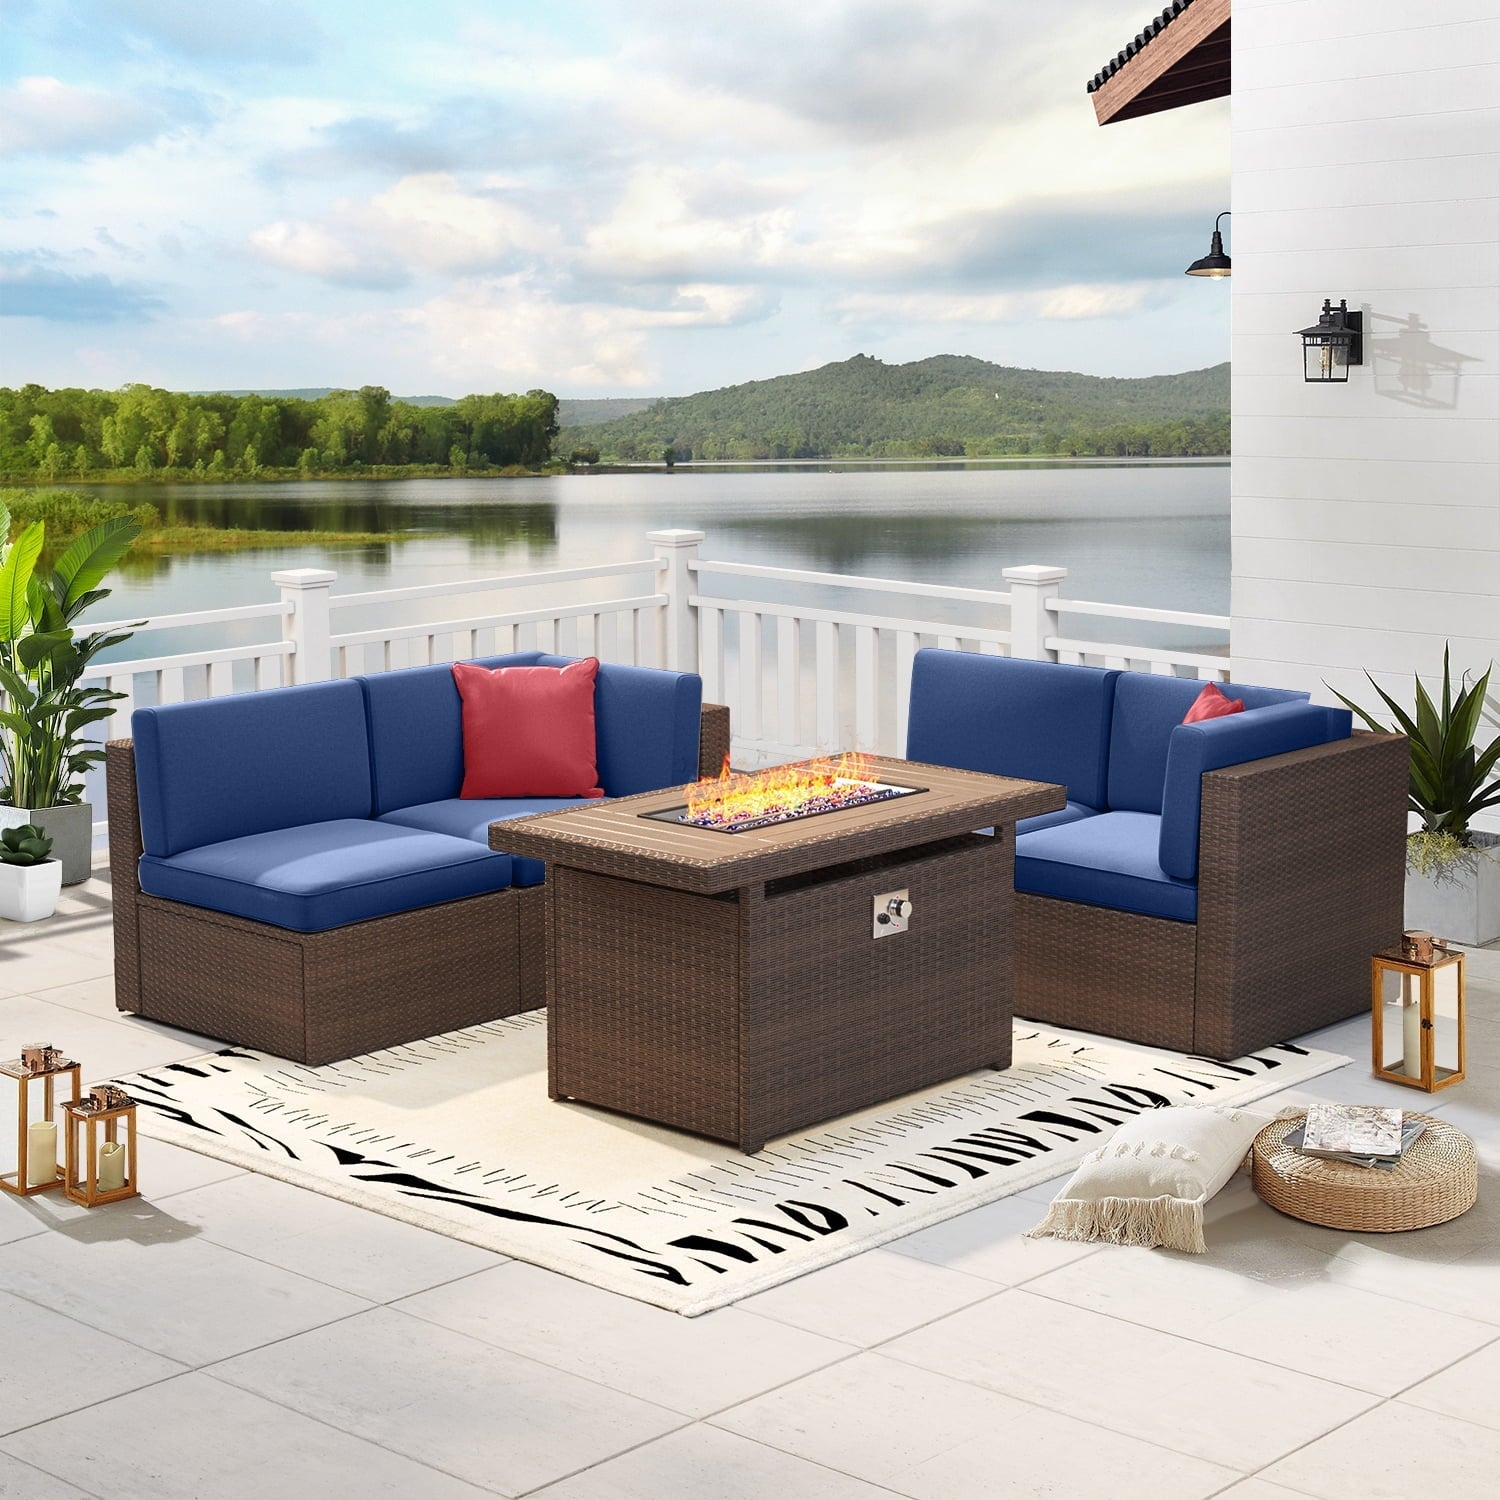 5 Piece Patio Furniture Set, Outdoor Patio Furniture Sets with Fire Pit, Wicker Patio Furniture, Outdoor Conversation Set with Blue Cushions